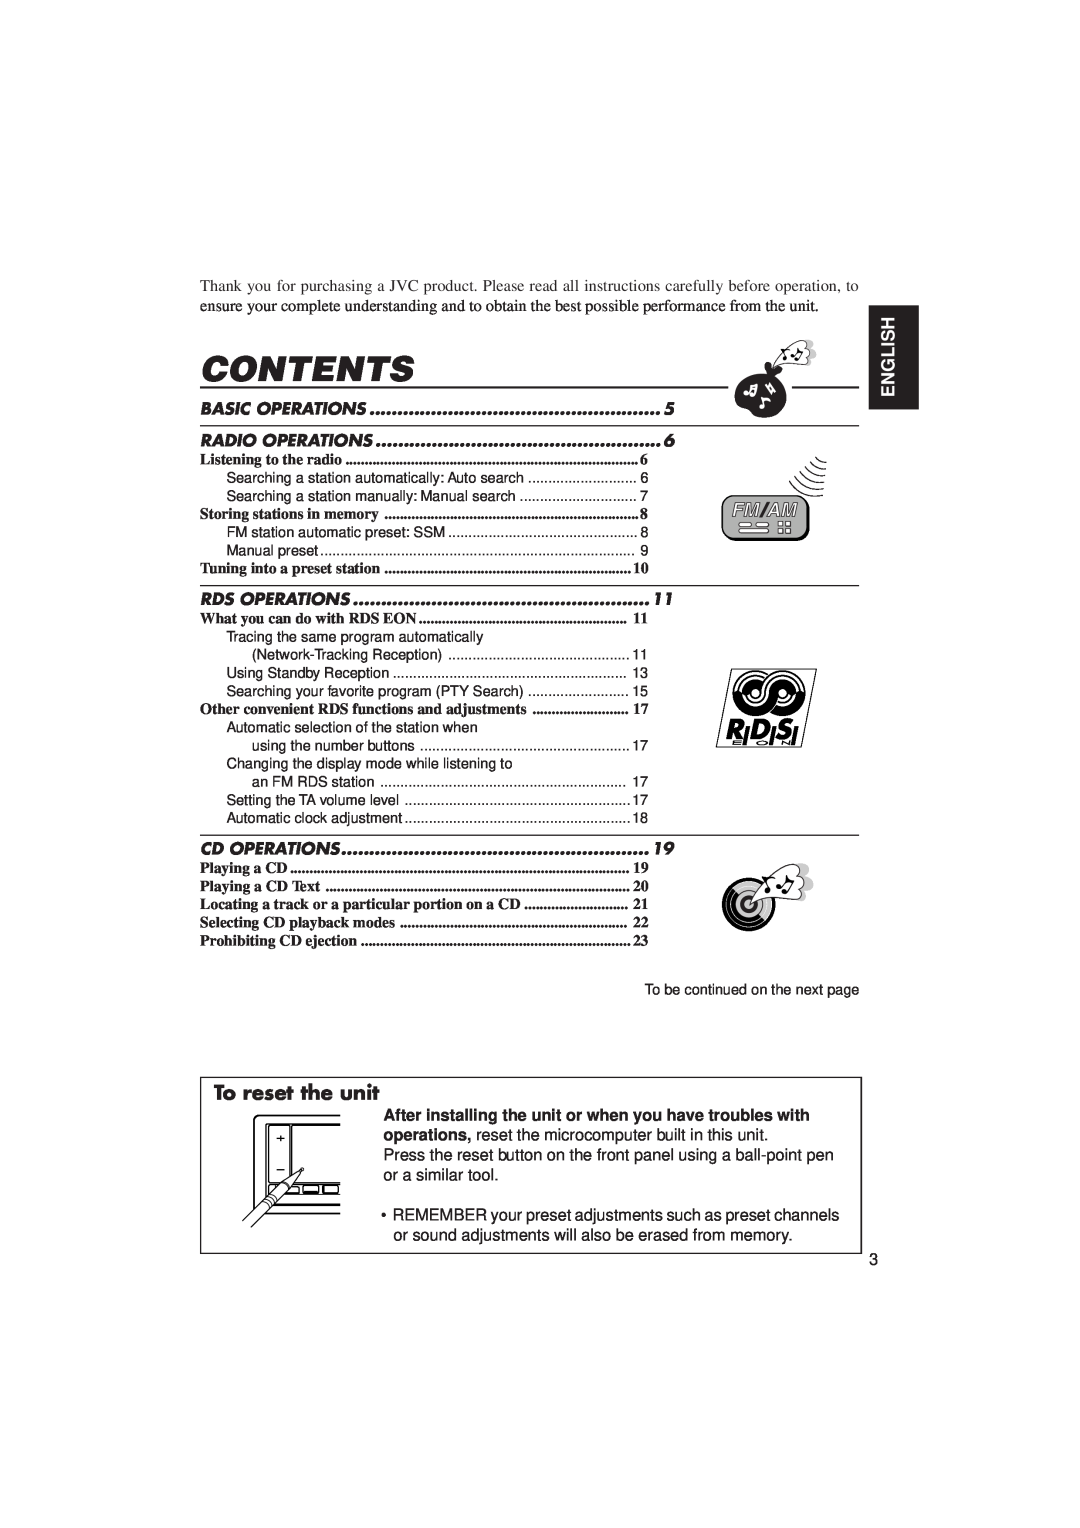 JVC KD-LX3R manual Contents, To reset the unit, English 